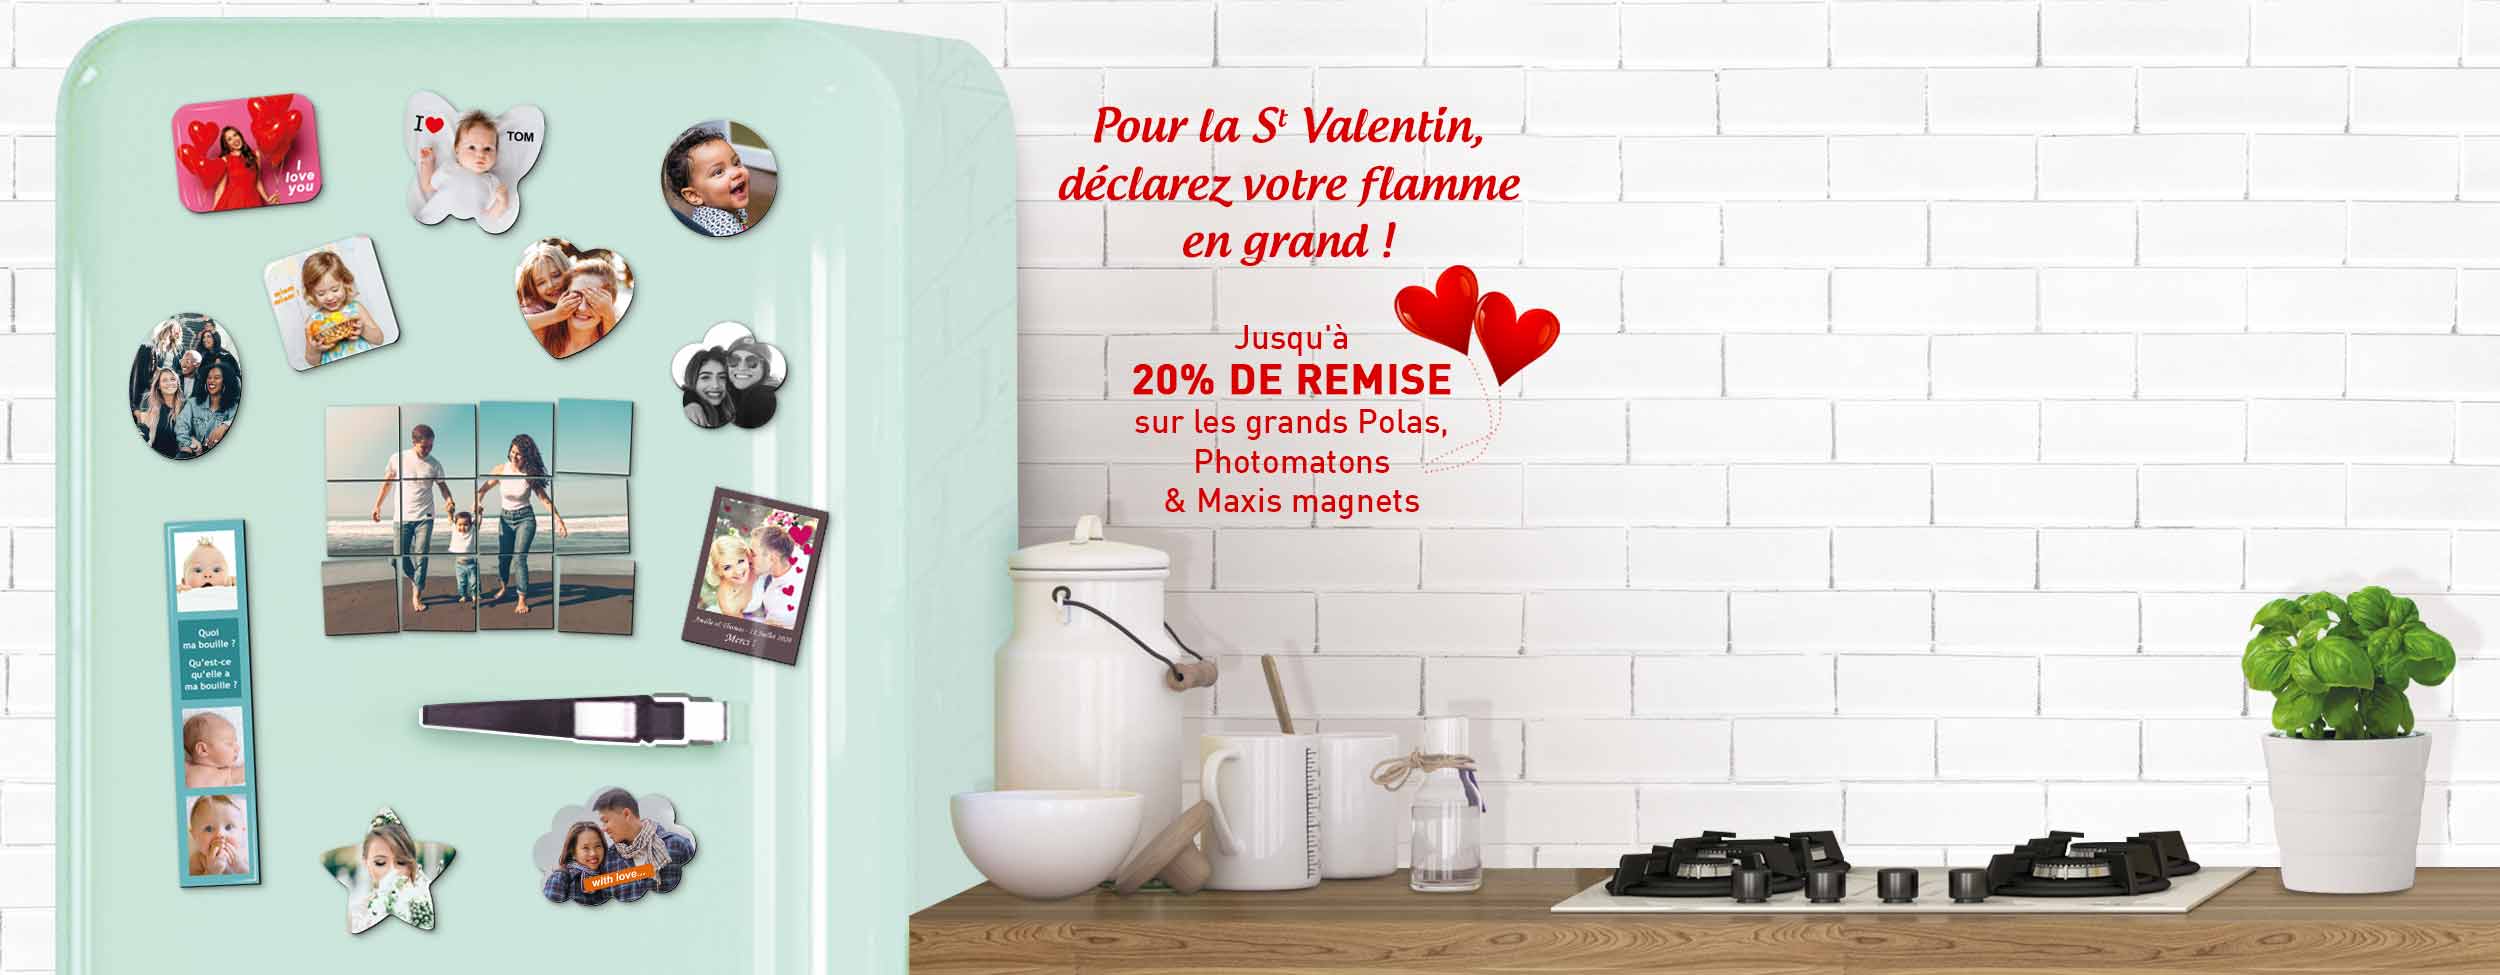 photo_magnet_personnalise_banner_home_St_Valentin